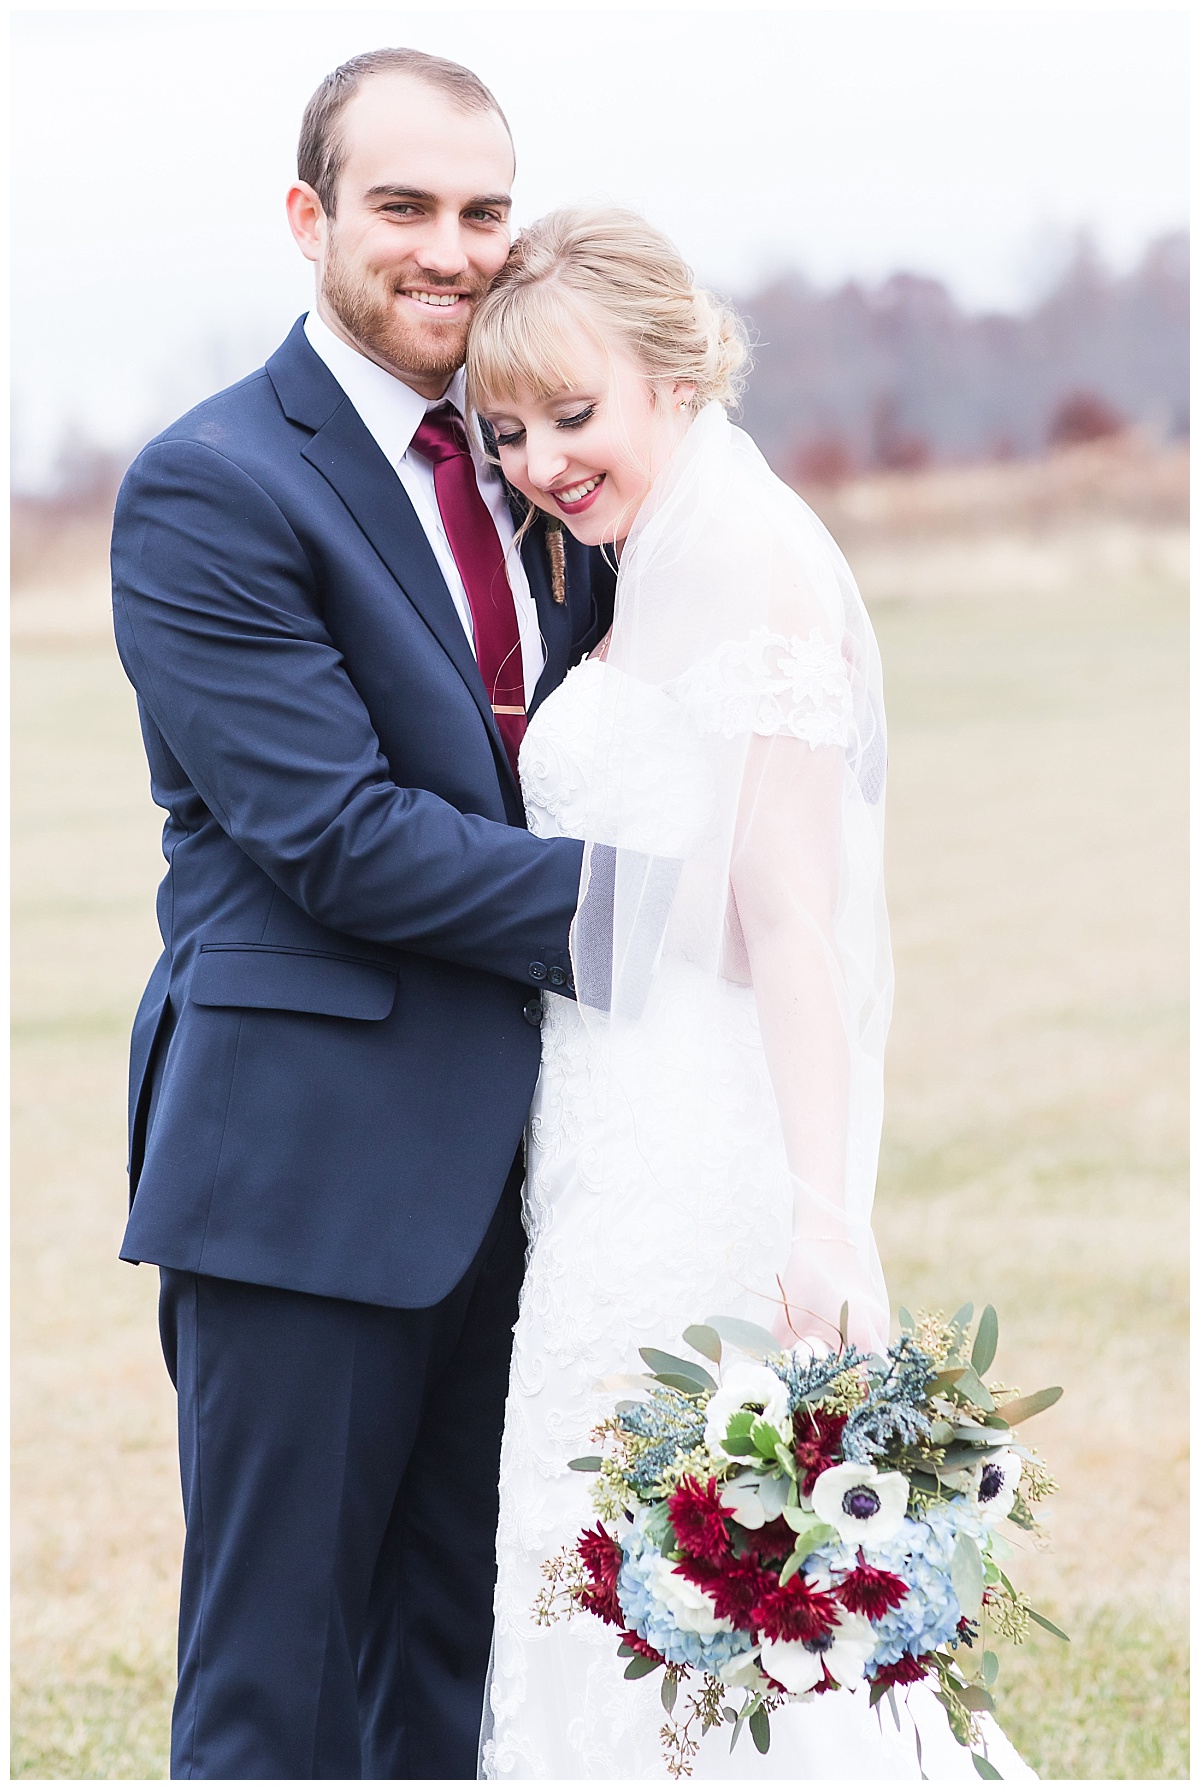 Magical Winter Wedding photo by Simply Seeking Photography